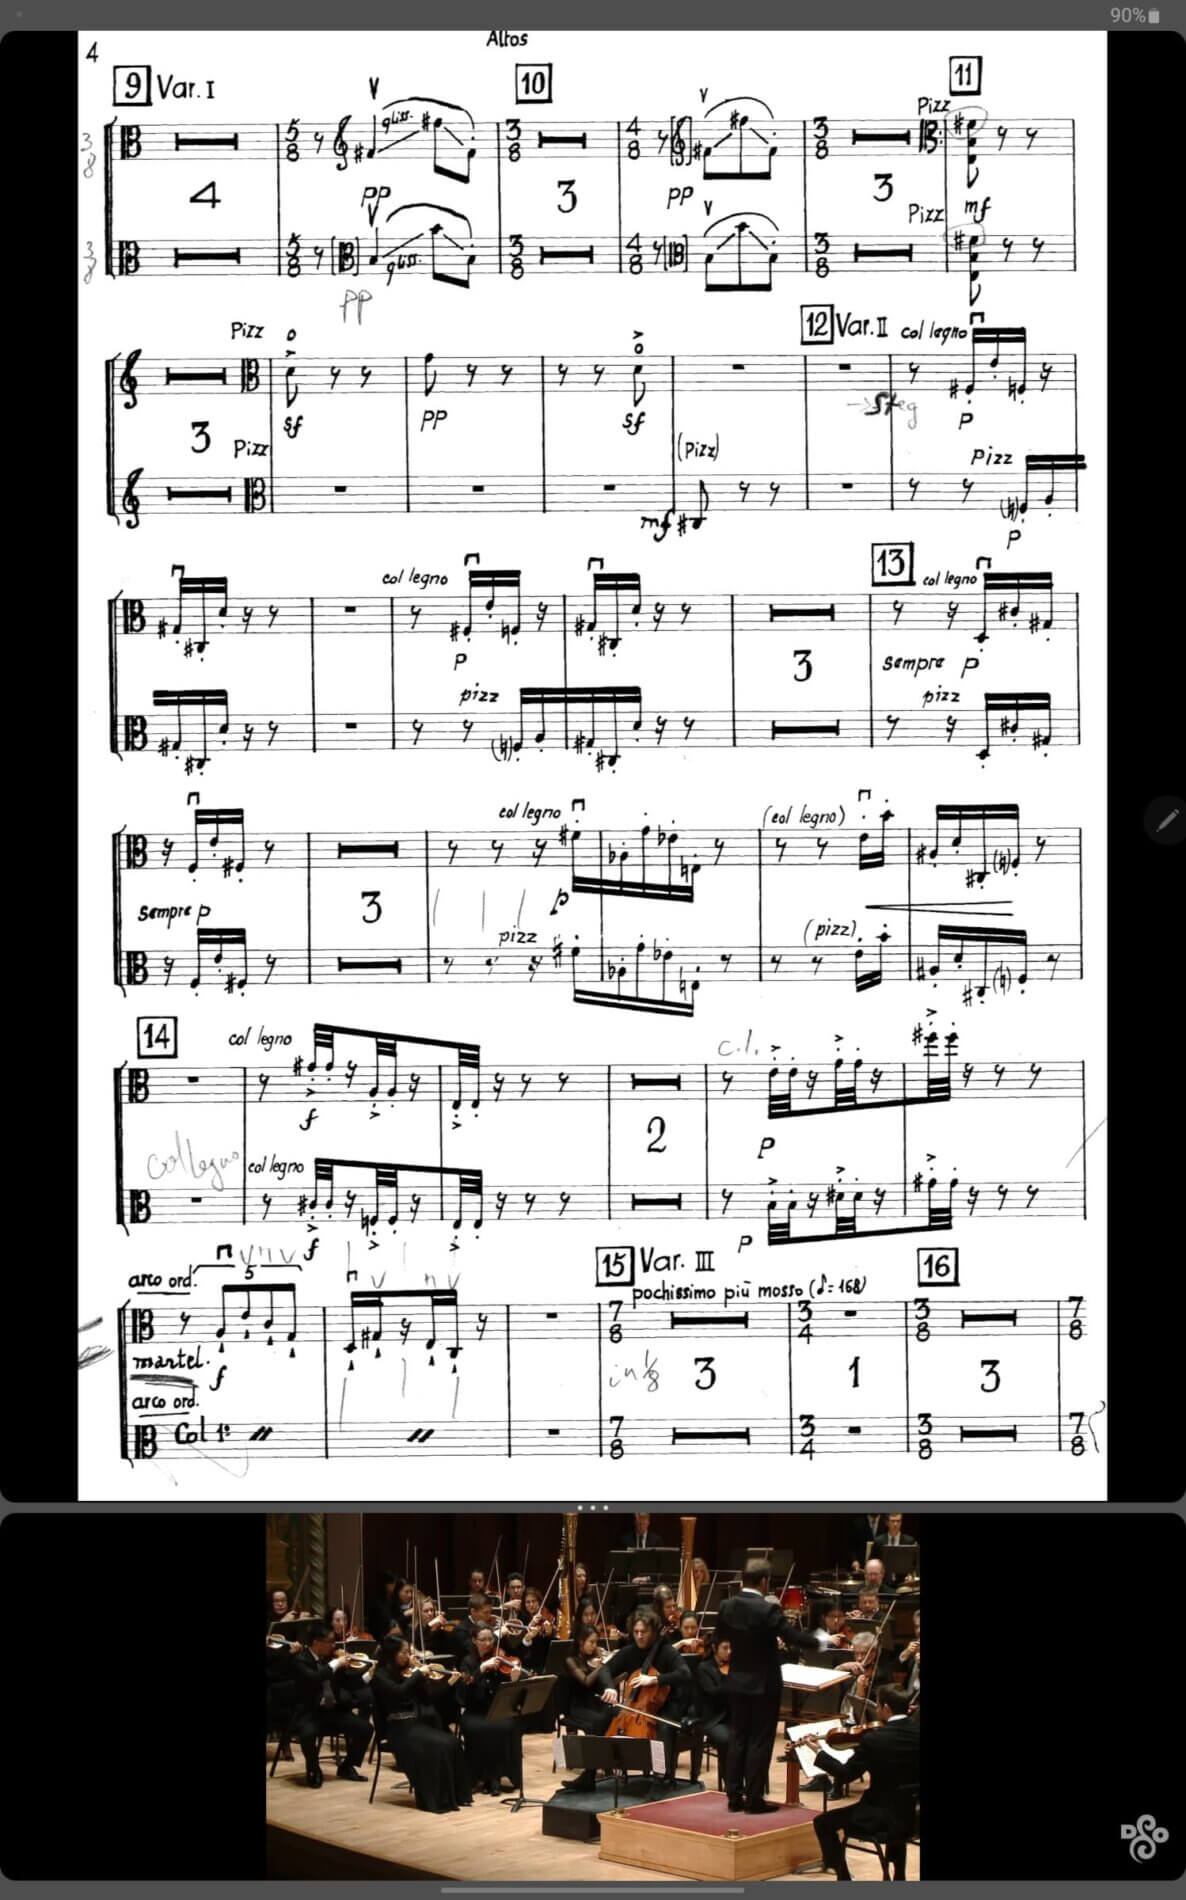 Sheet music and videos on a tablet computer - Shared screen (Android multi window aka split screen)